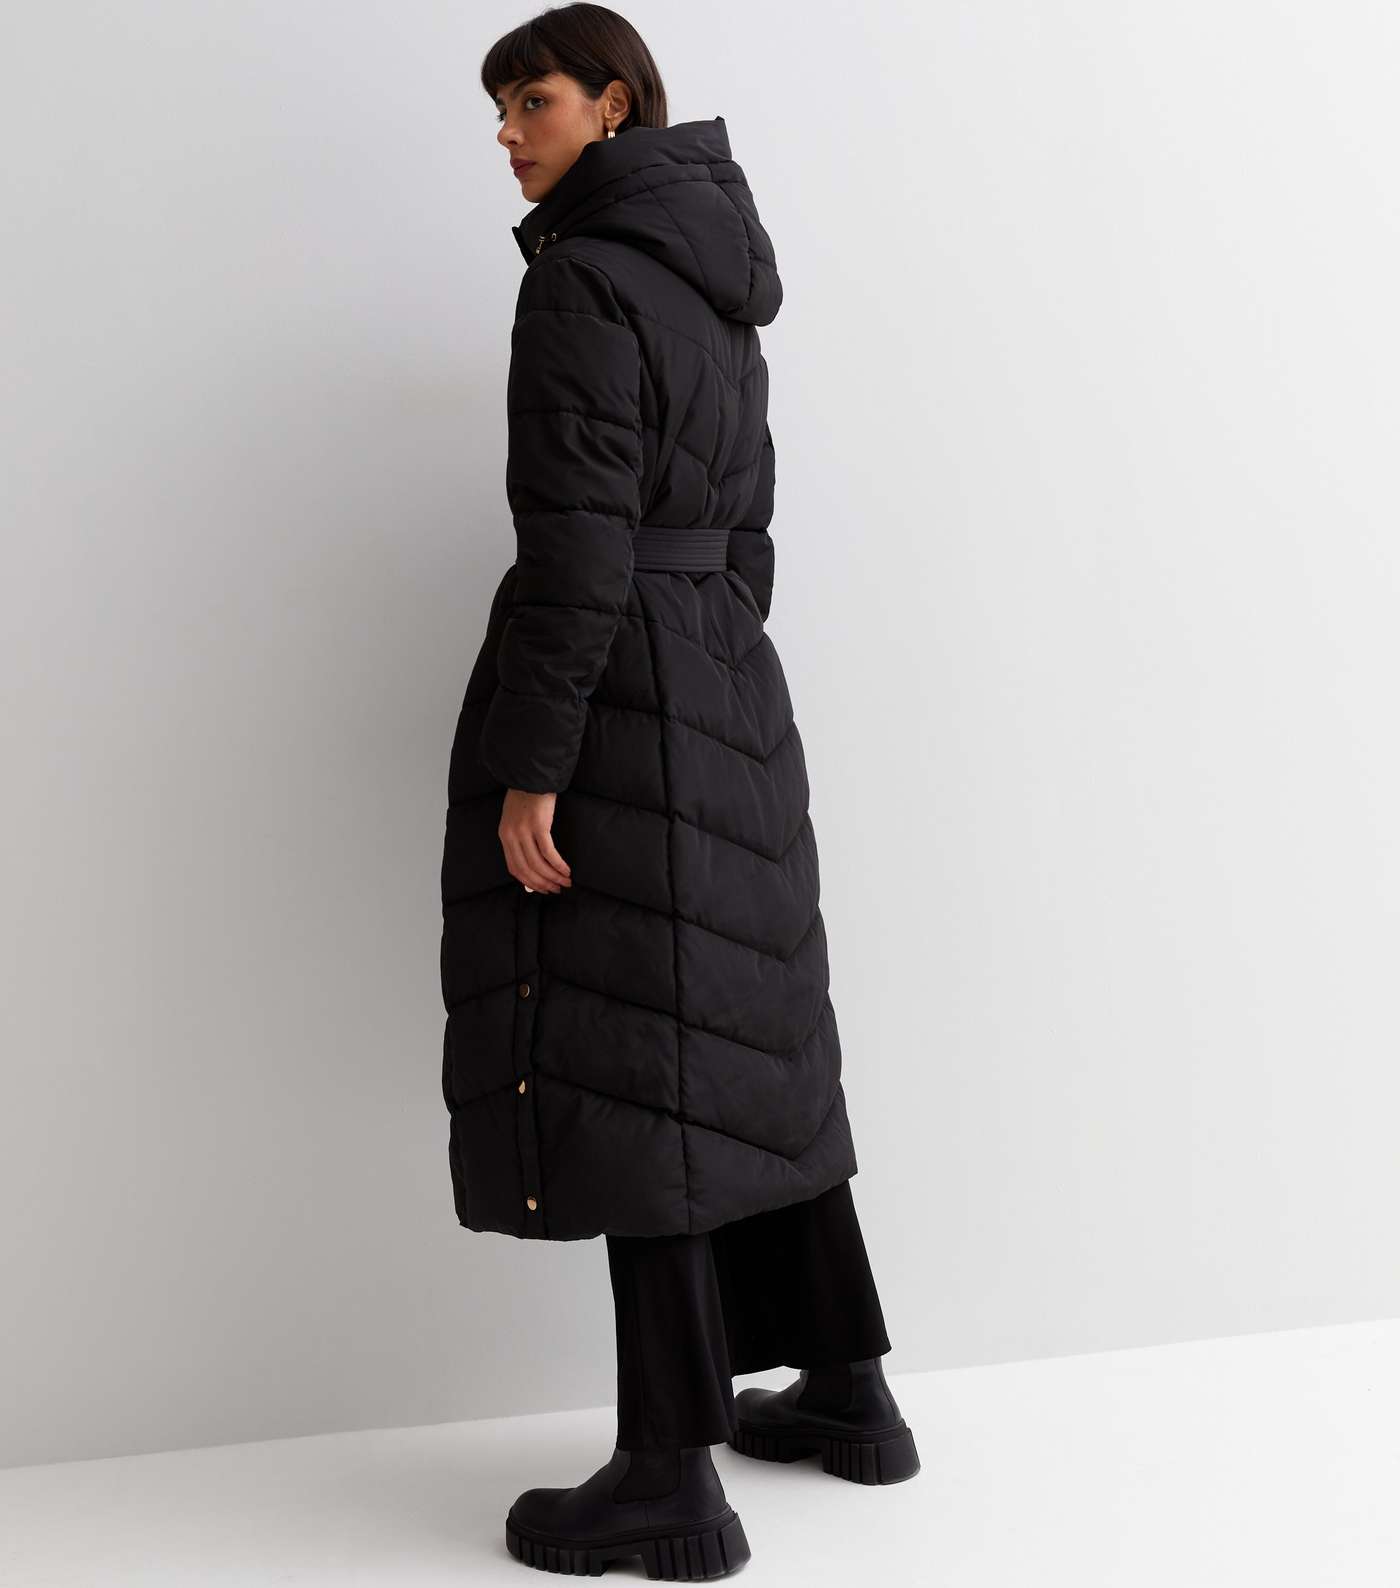 Cameo Rose Black Quilted Longline Puffer Coat Image 4